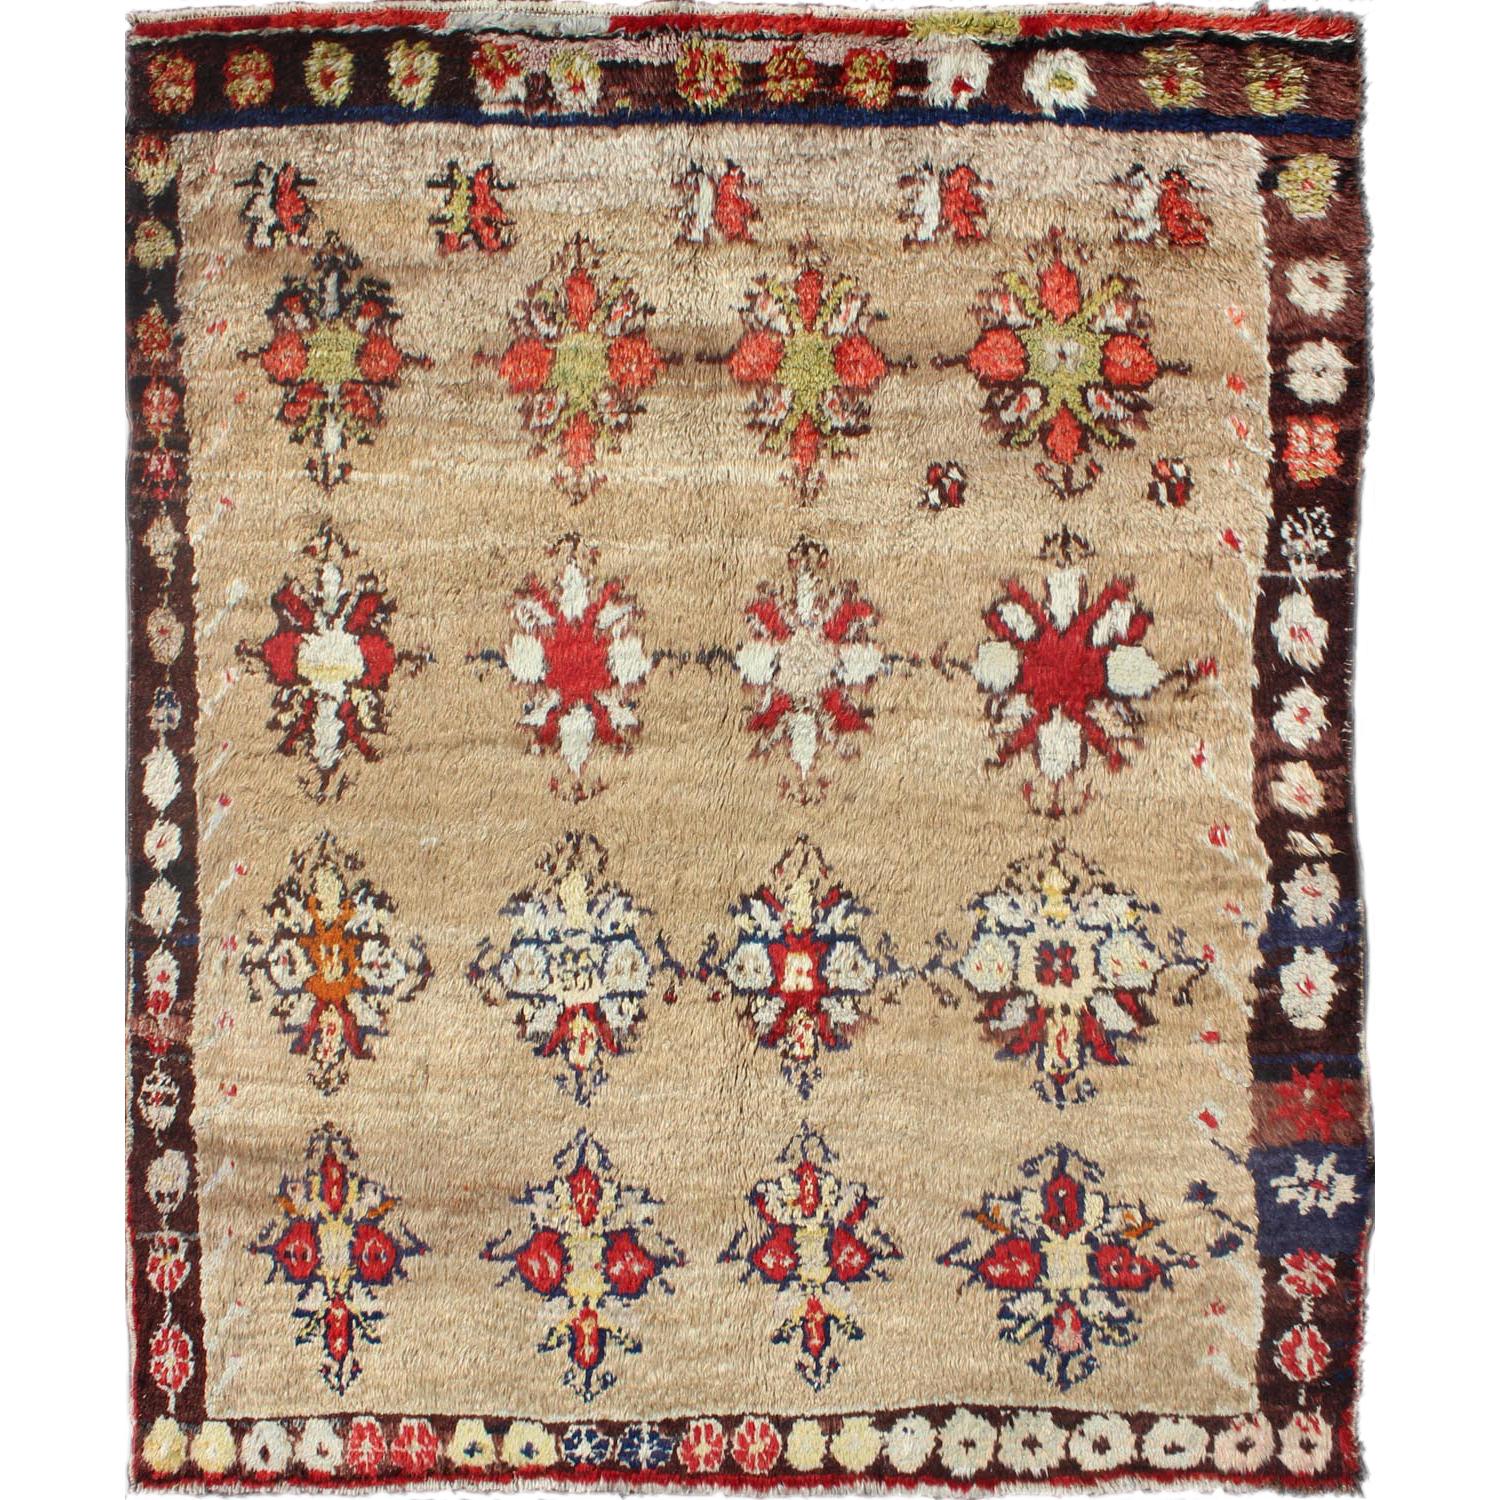 Angora Turkish Tulu Carpet with Colorful Floral Designs Set on Sand Field